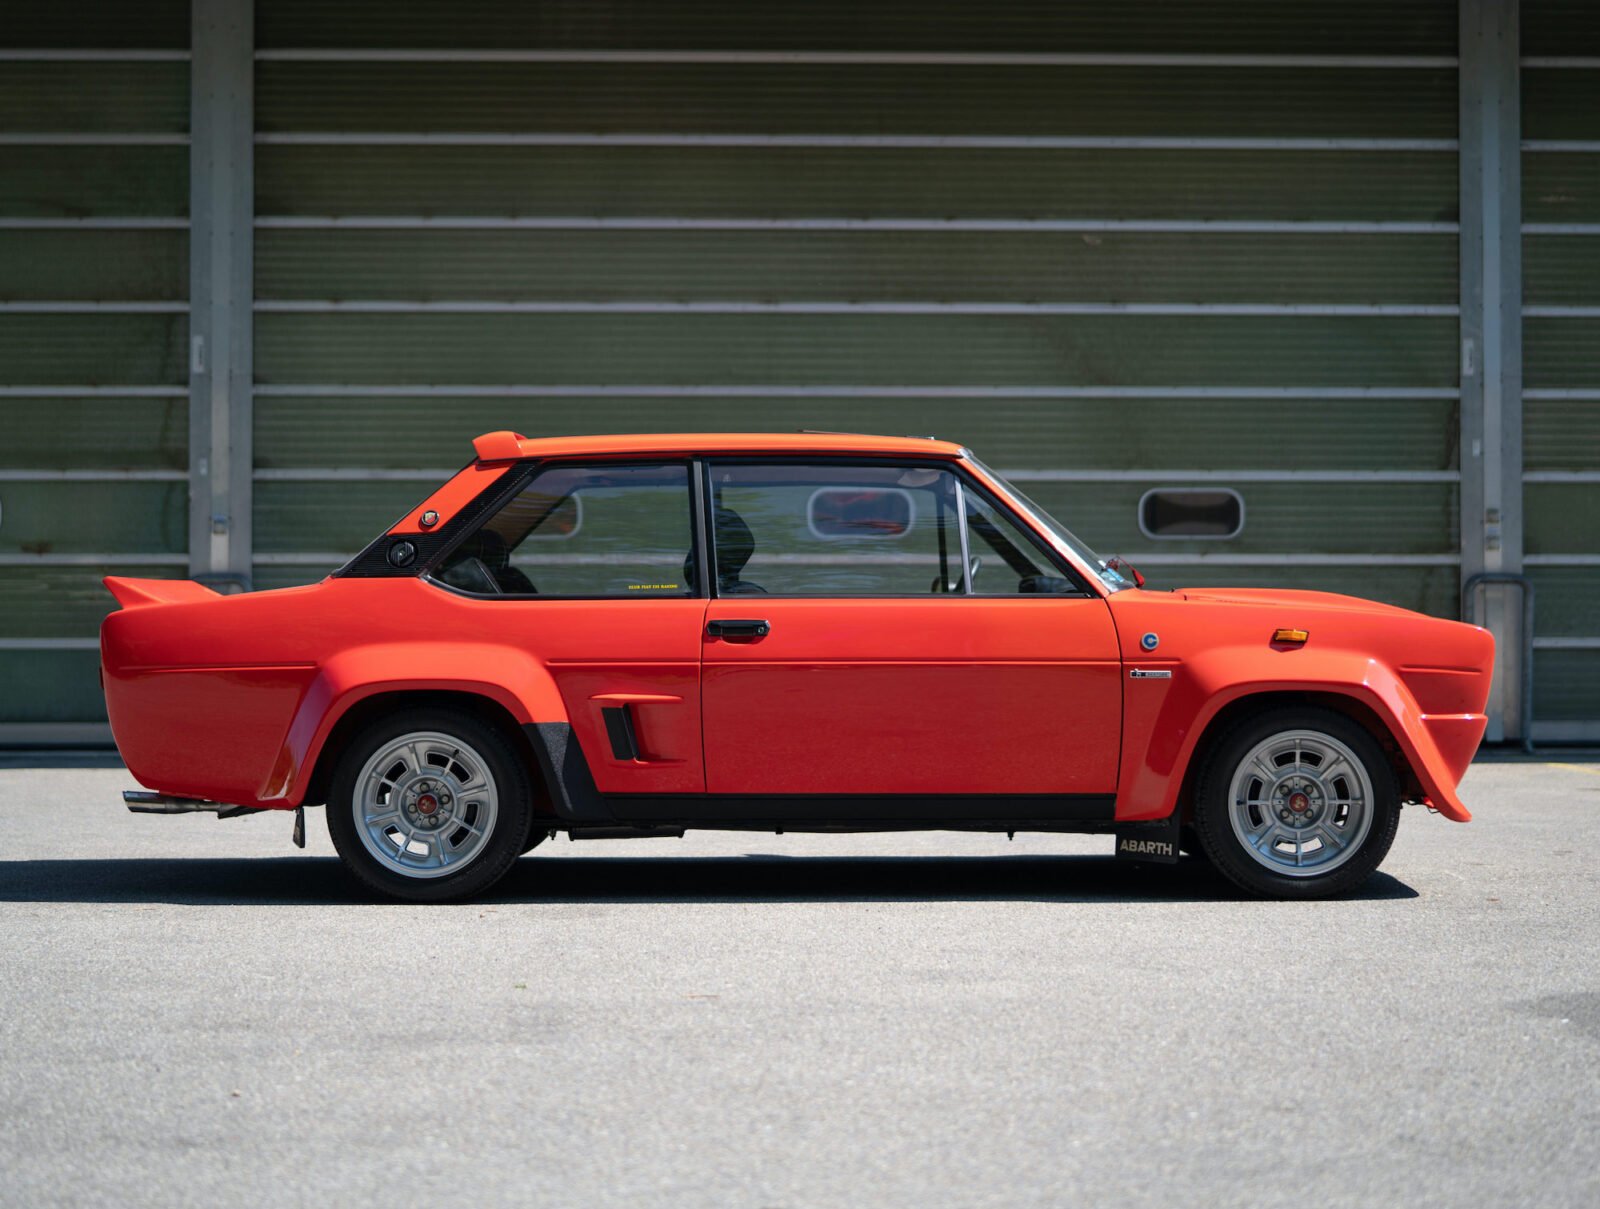 Fiat 131 Abarth Rally Stradale The Car That Won The